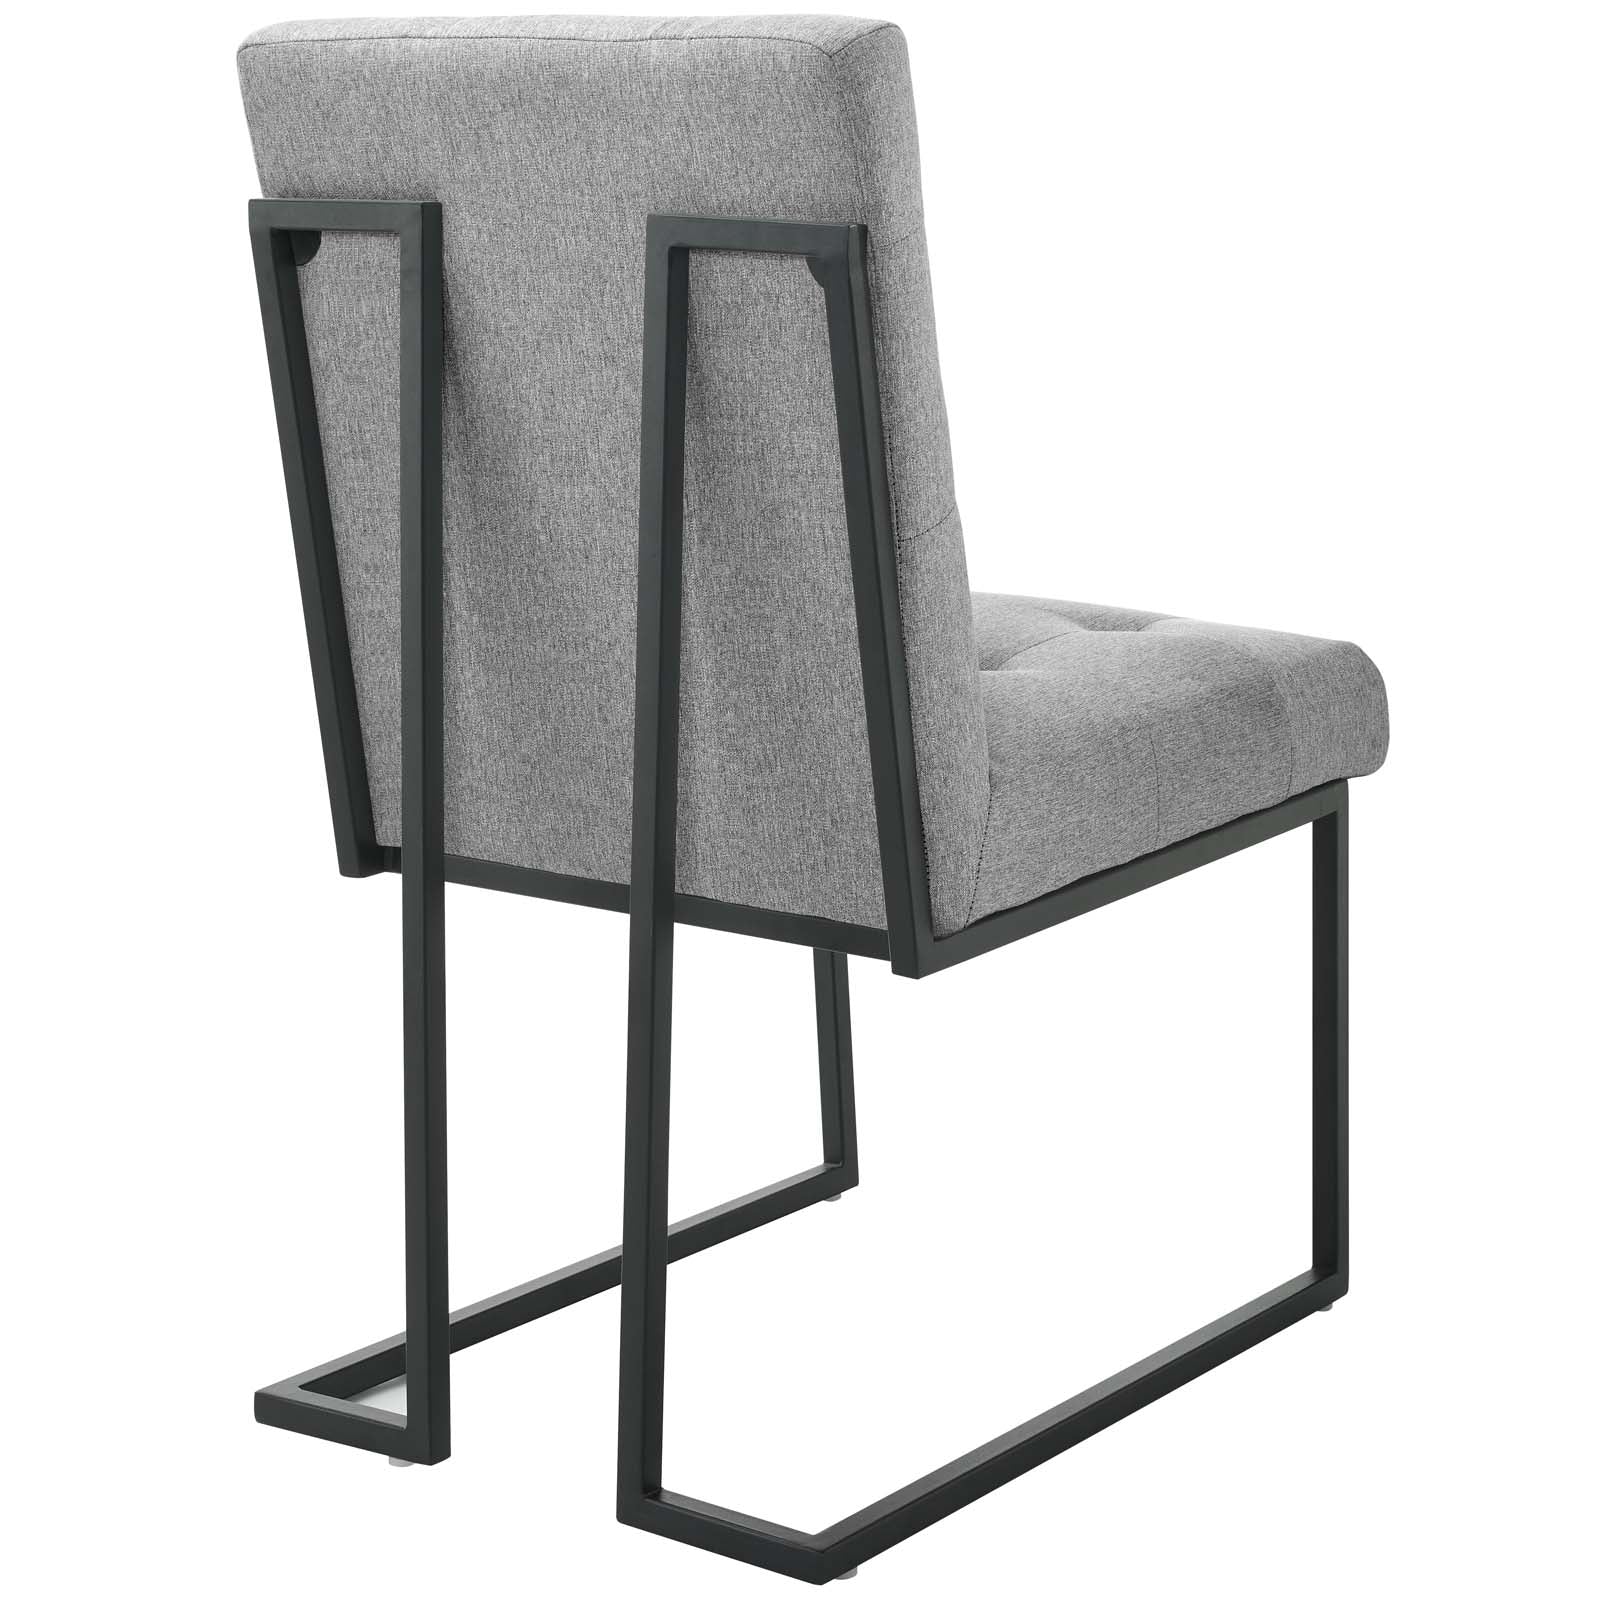 Modway Dining Chairs - Privy Black Stainless Steel Upholstered Fabric Dining Chair Black Light Gray